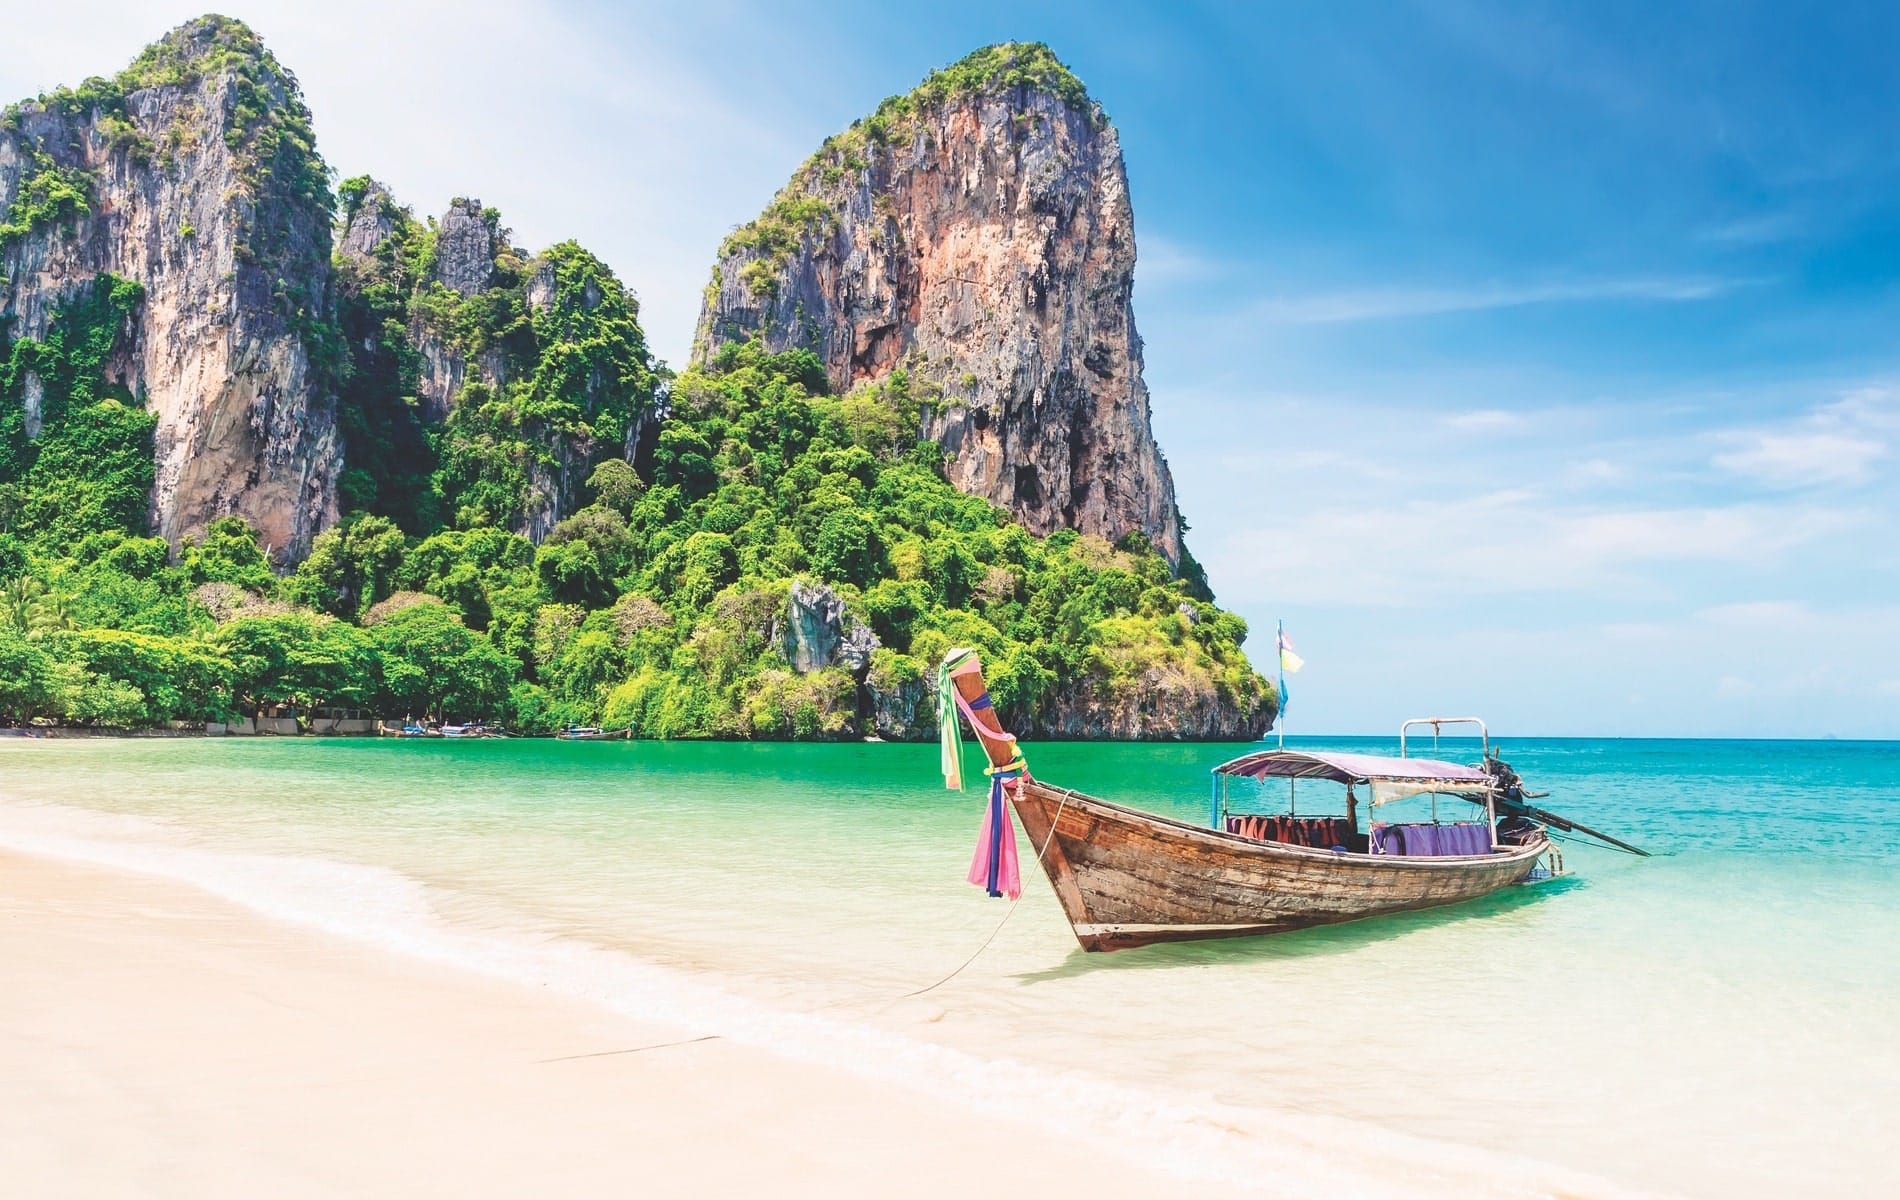 Krabi province in Thailand is one of our top picks for the most beautiful places in the world